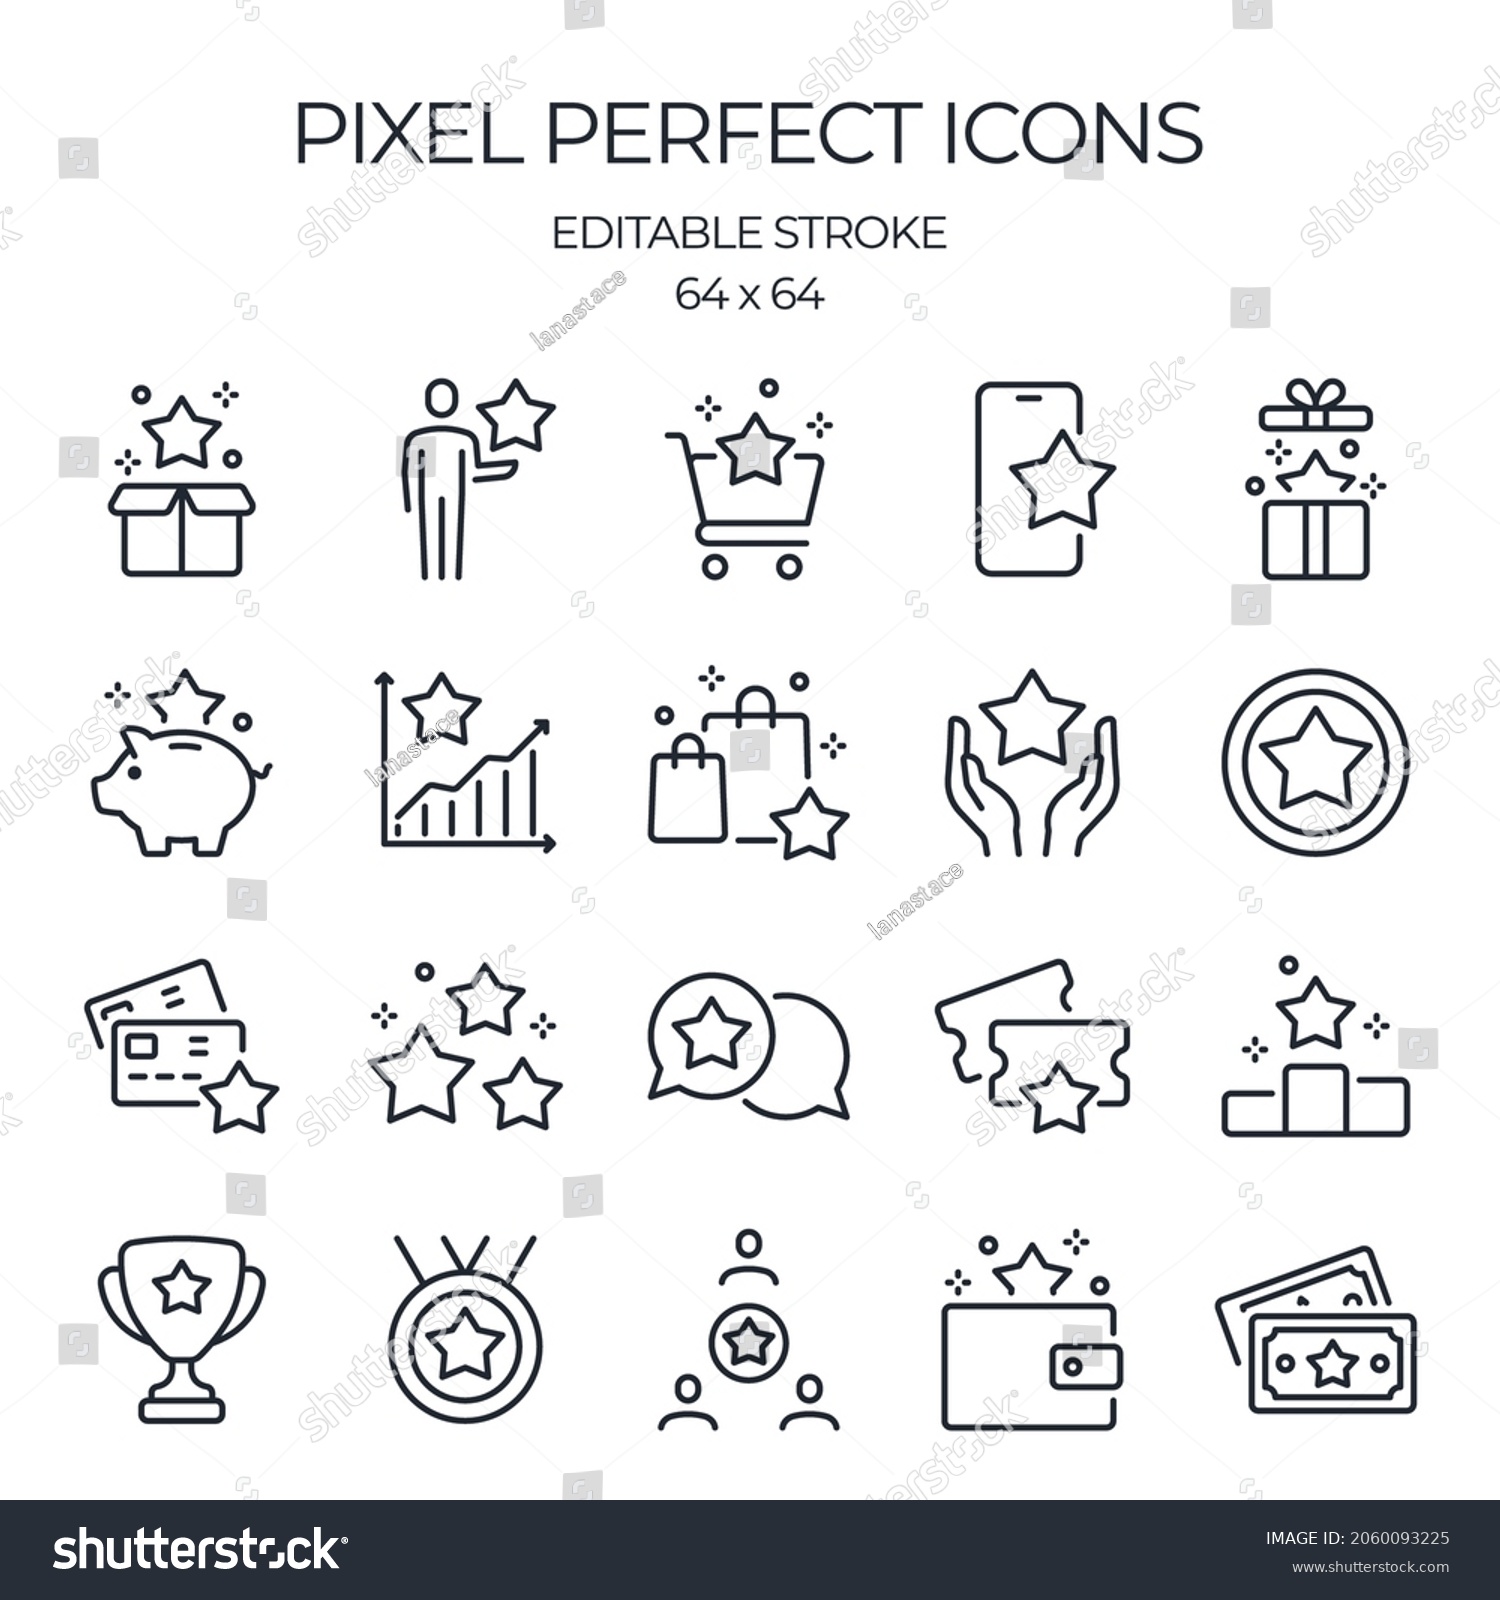 Bonus and reward related editable stroke outline icon isolated on white background flat vector illustration. Pixel perfect. 64 x 64. #2060093225